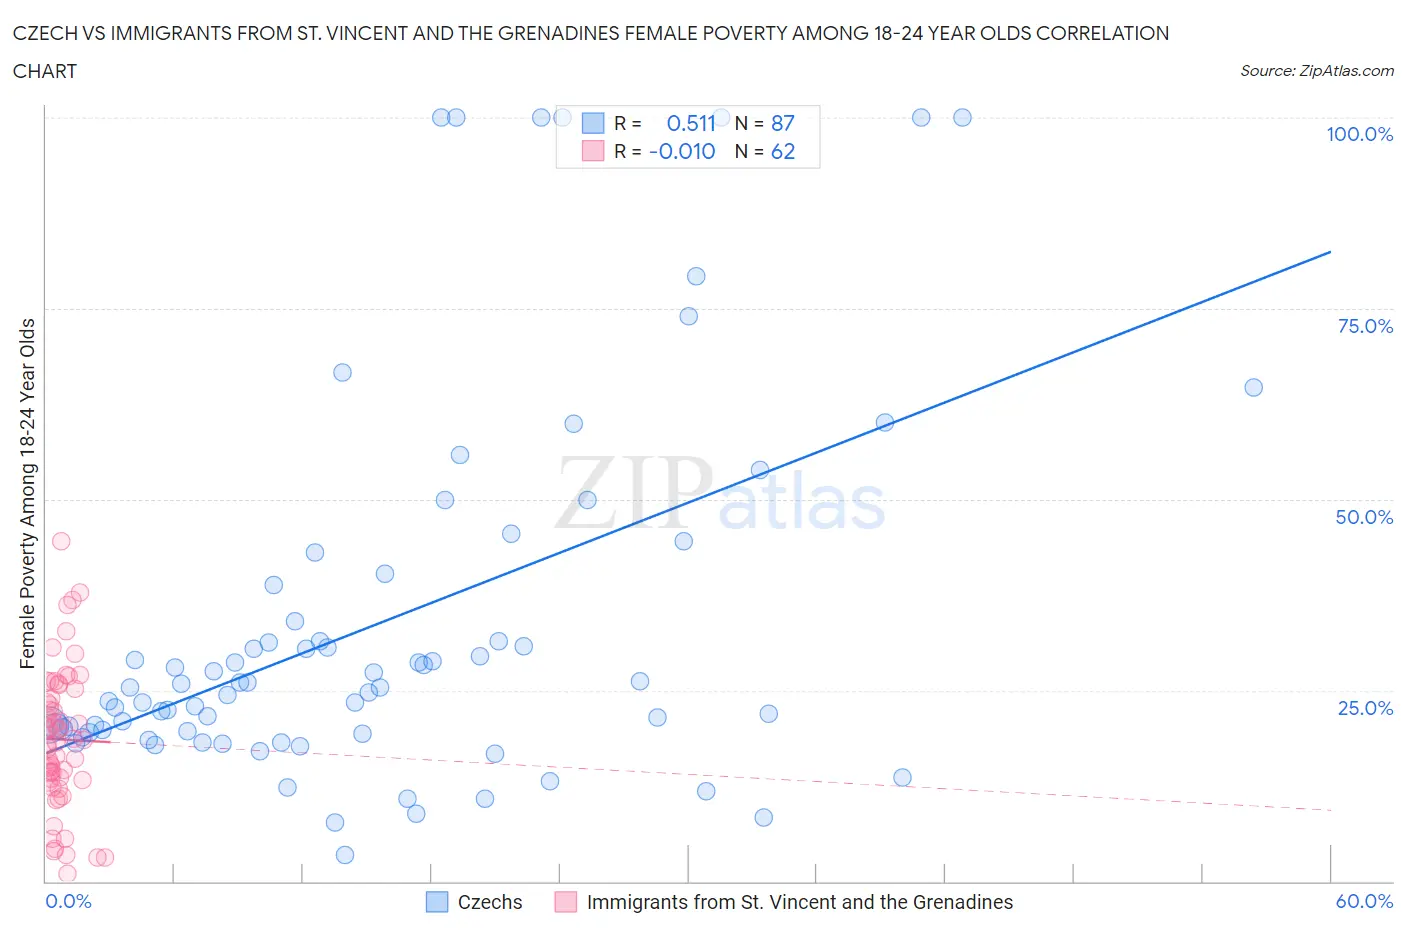 Czech vs Immigrants from St. Vincent and the Grenadines Female Poverty Among 18-24 Year Olds